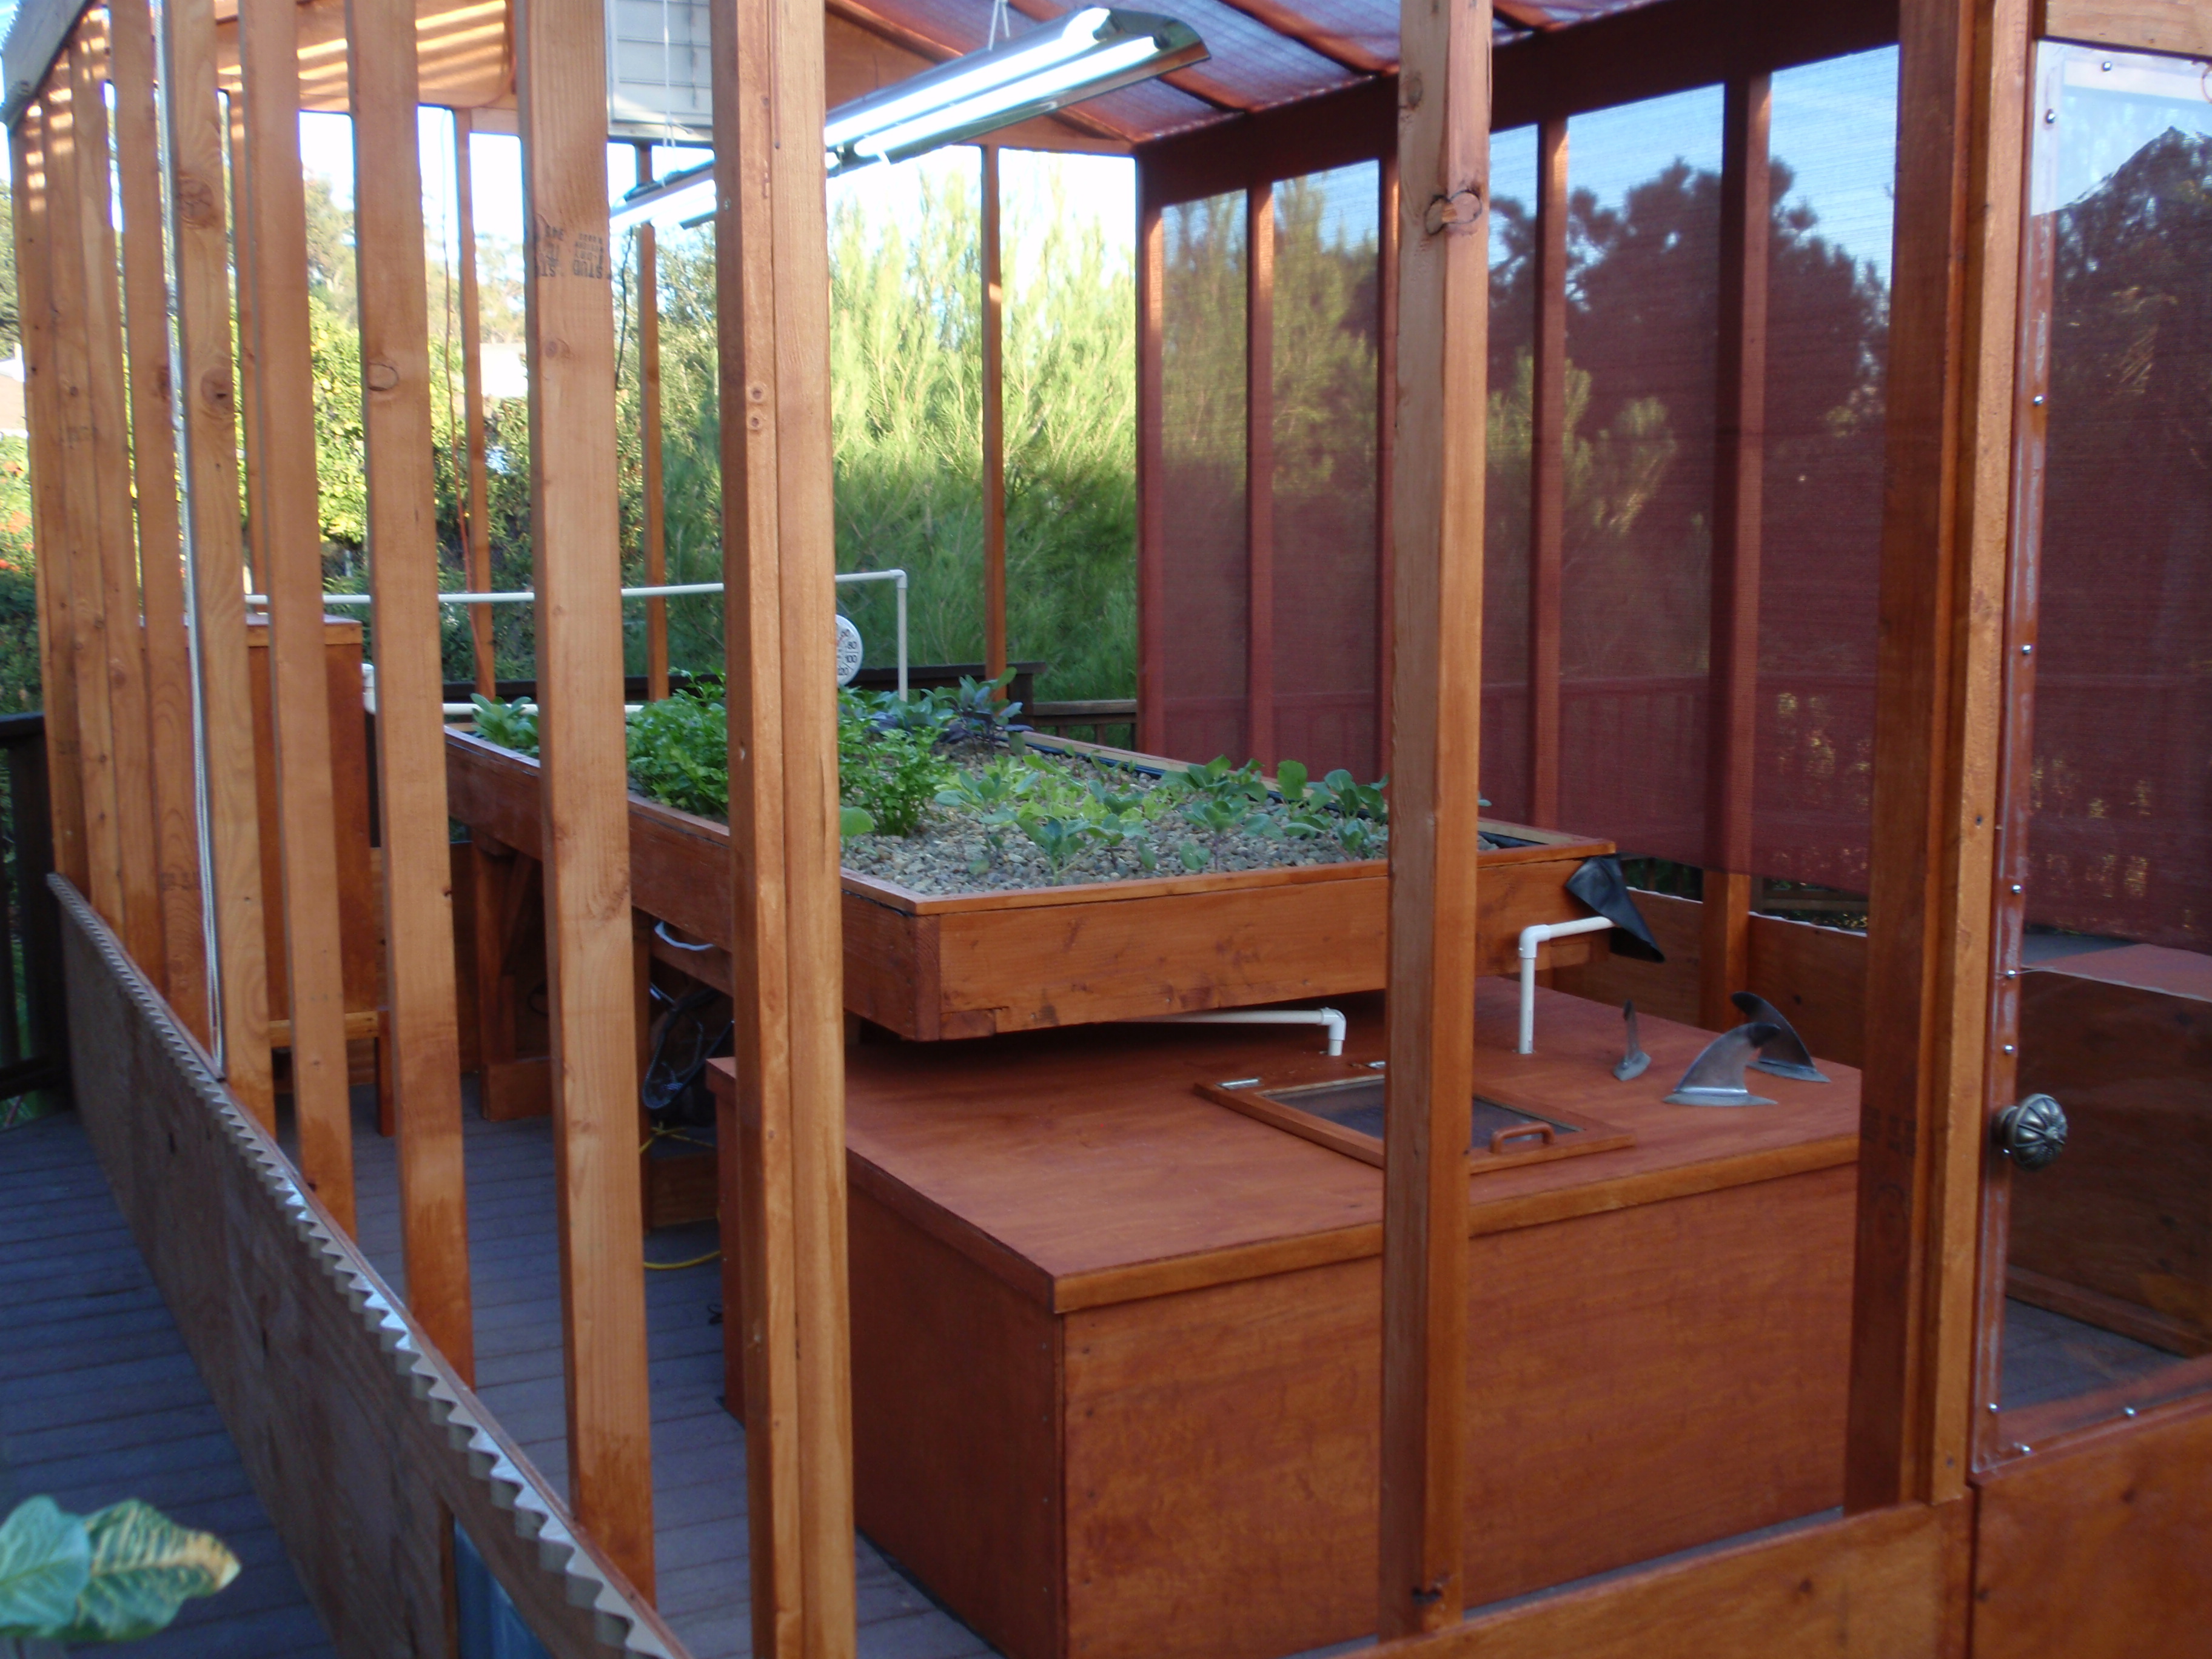 Master Aquaponics to Develop Your Personal Meals in Your Backyard